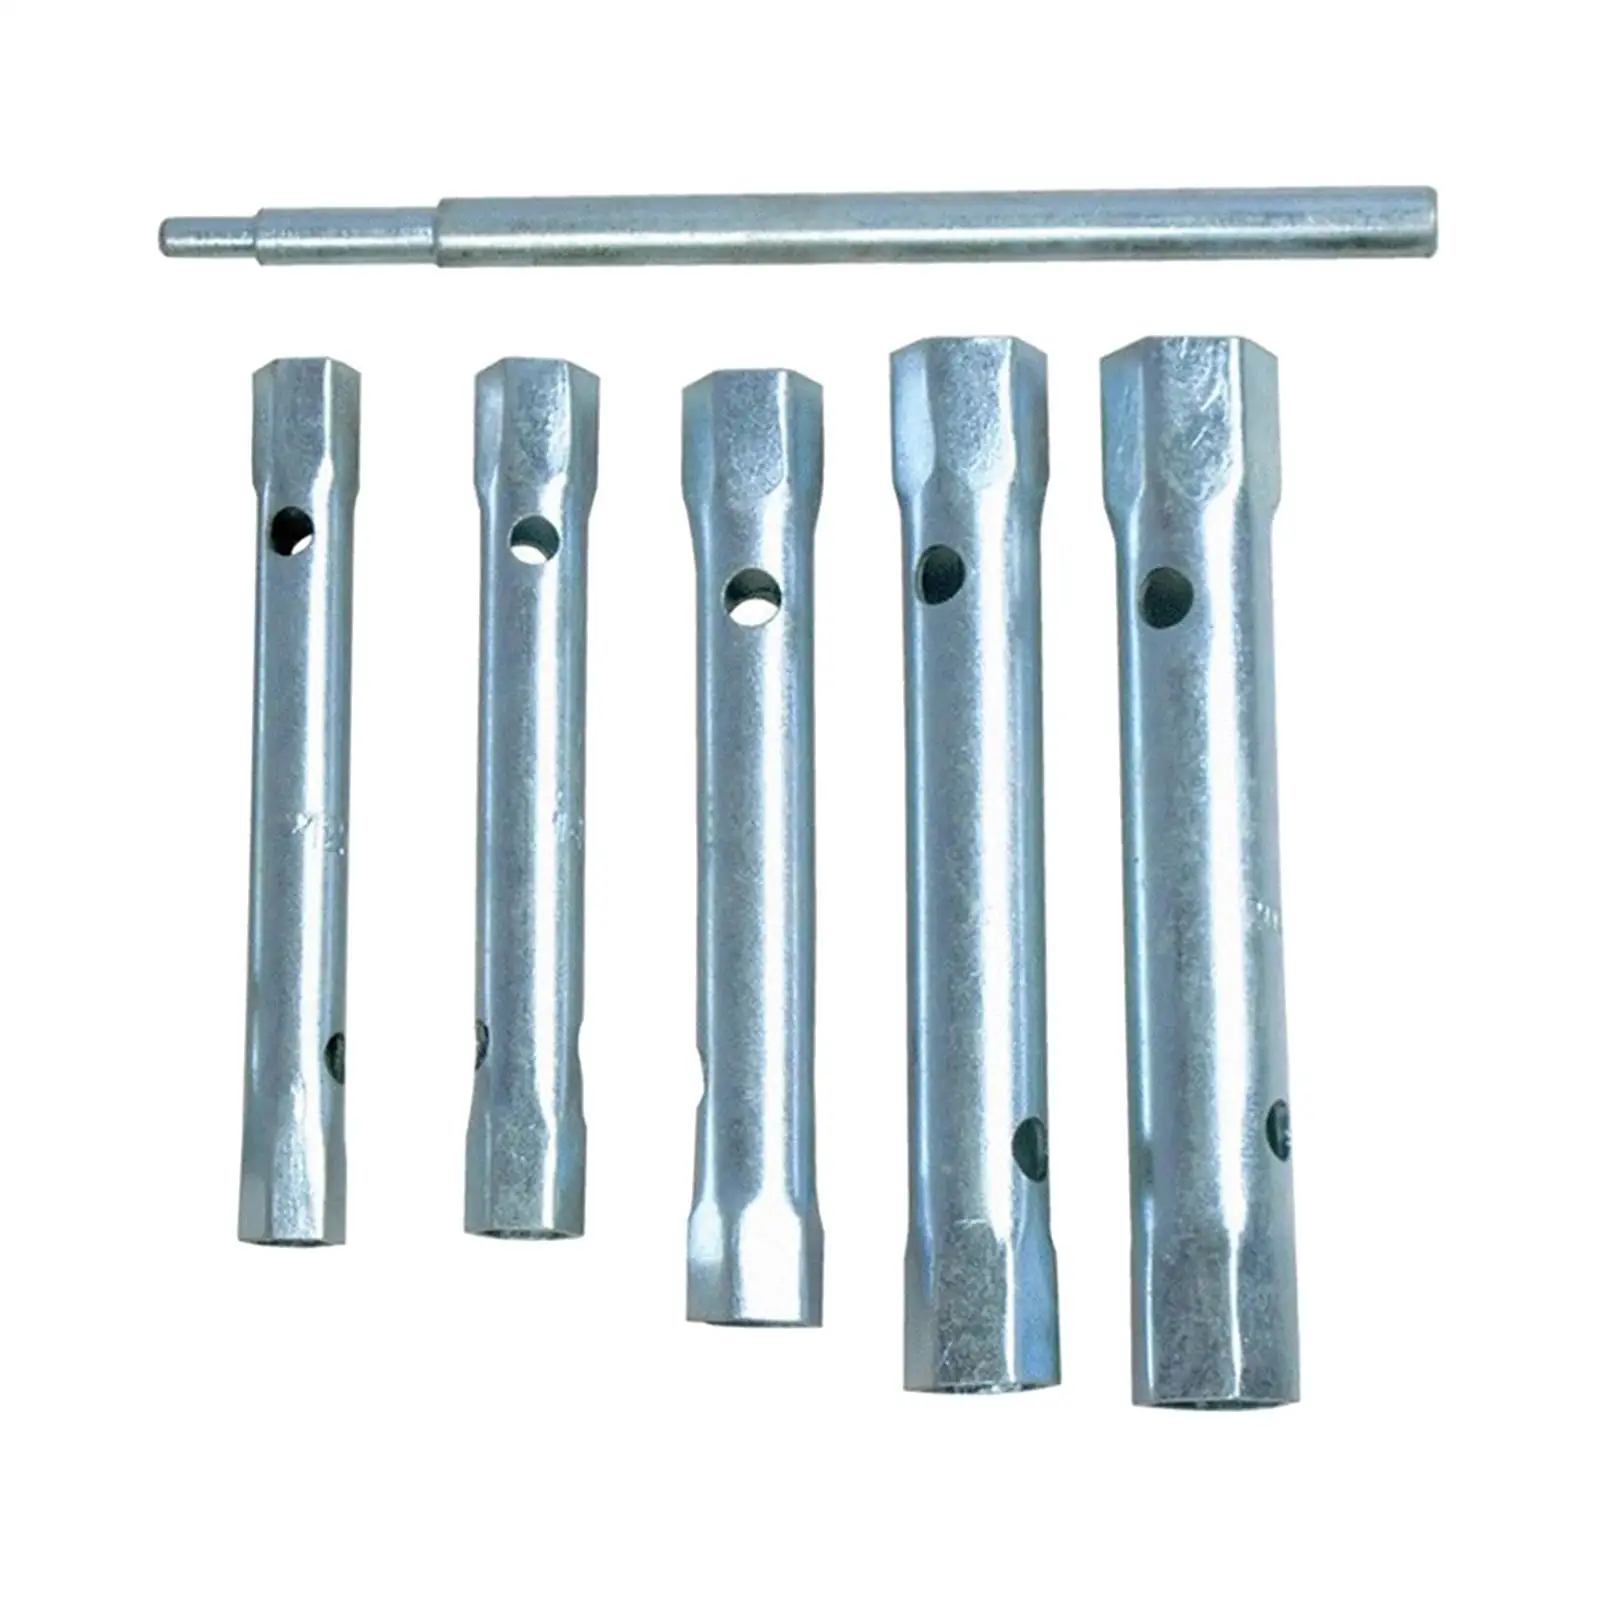 Professional Socket Wrench Faucet Accessories Repairing Tools Fixing Hex Socket for for Different Types of Sink Pipe Fittings